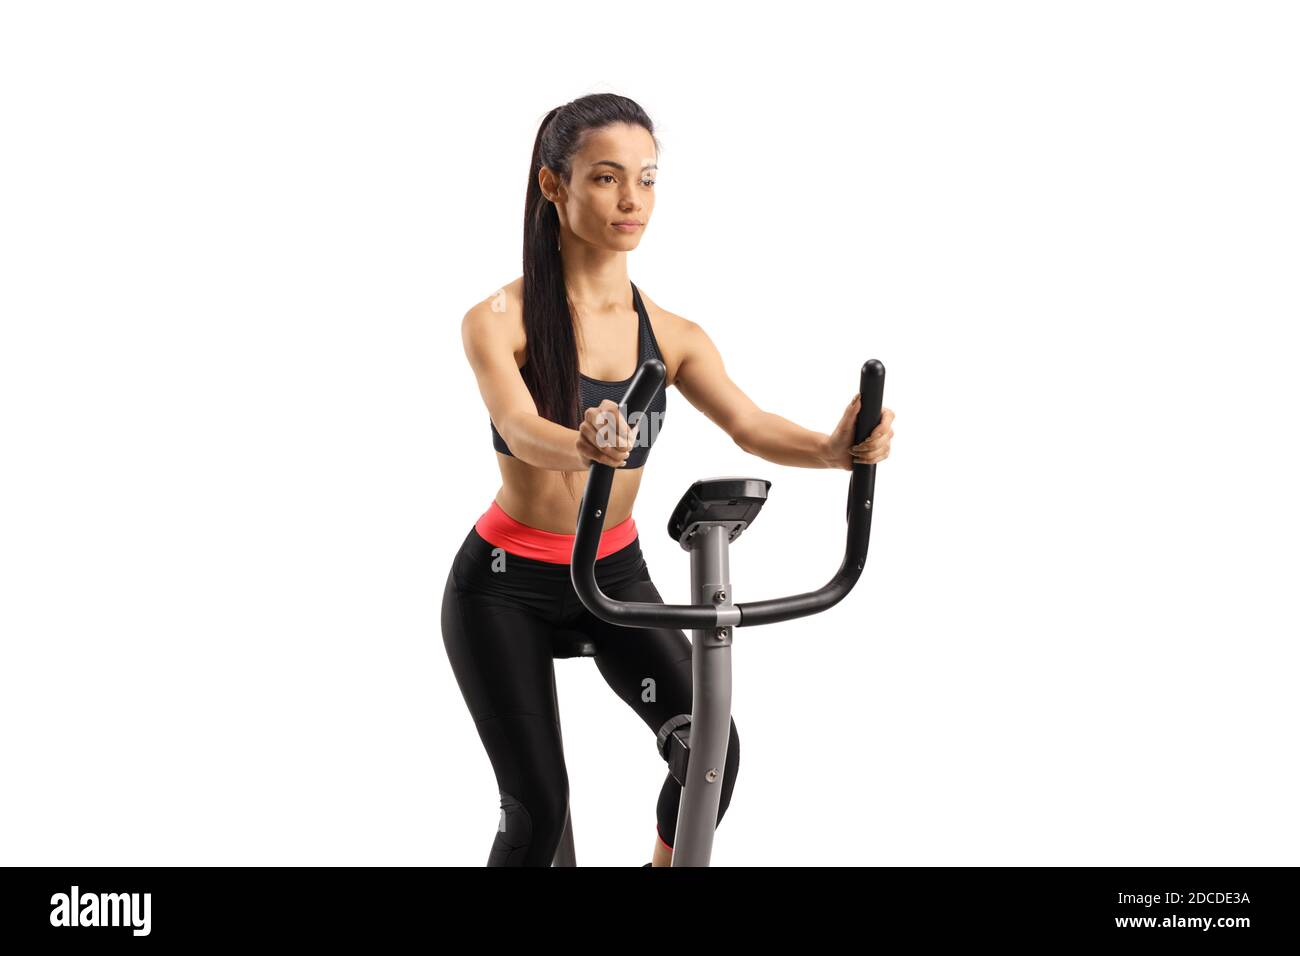 Young woman in sportswear exercising on a stationary bike isolated on white background Stock Photo